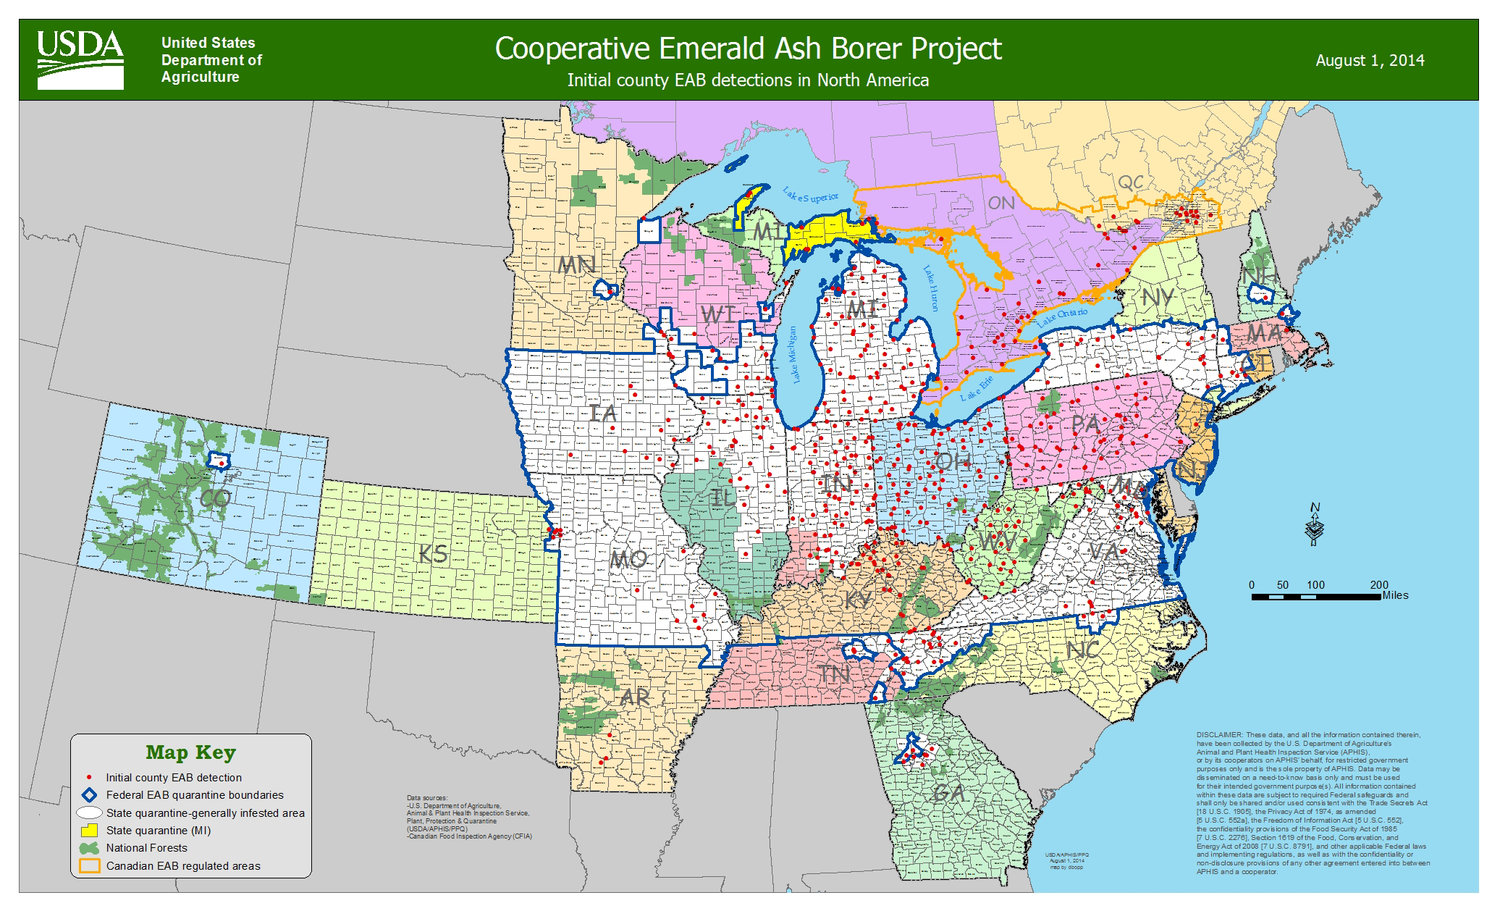 Emerald Ash Borer detections, as of August 1, 2014 (USDA/APHIS)